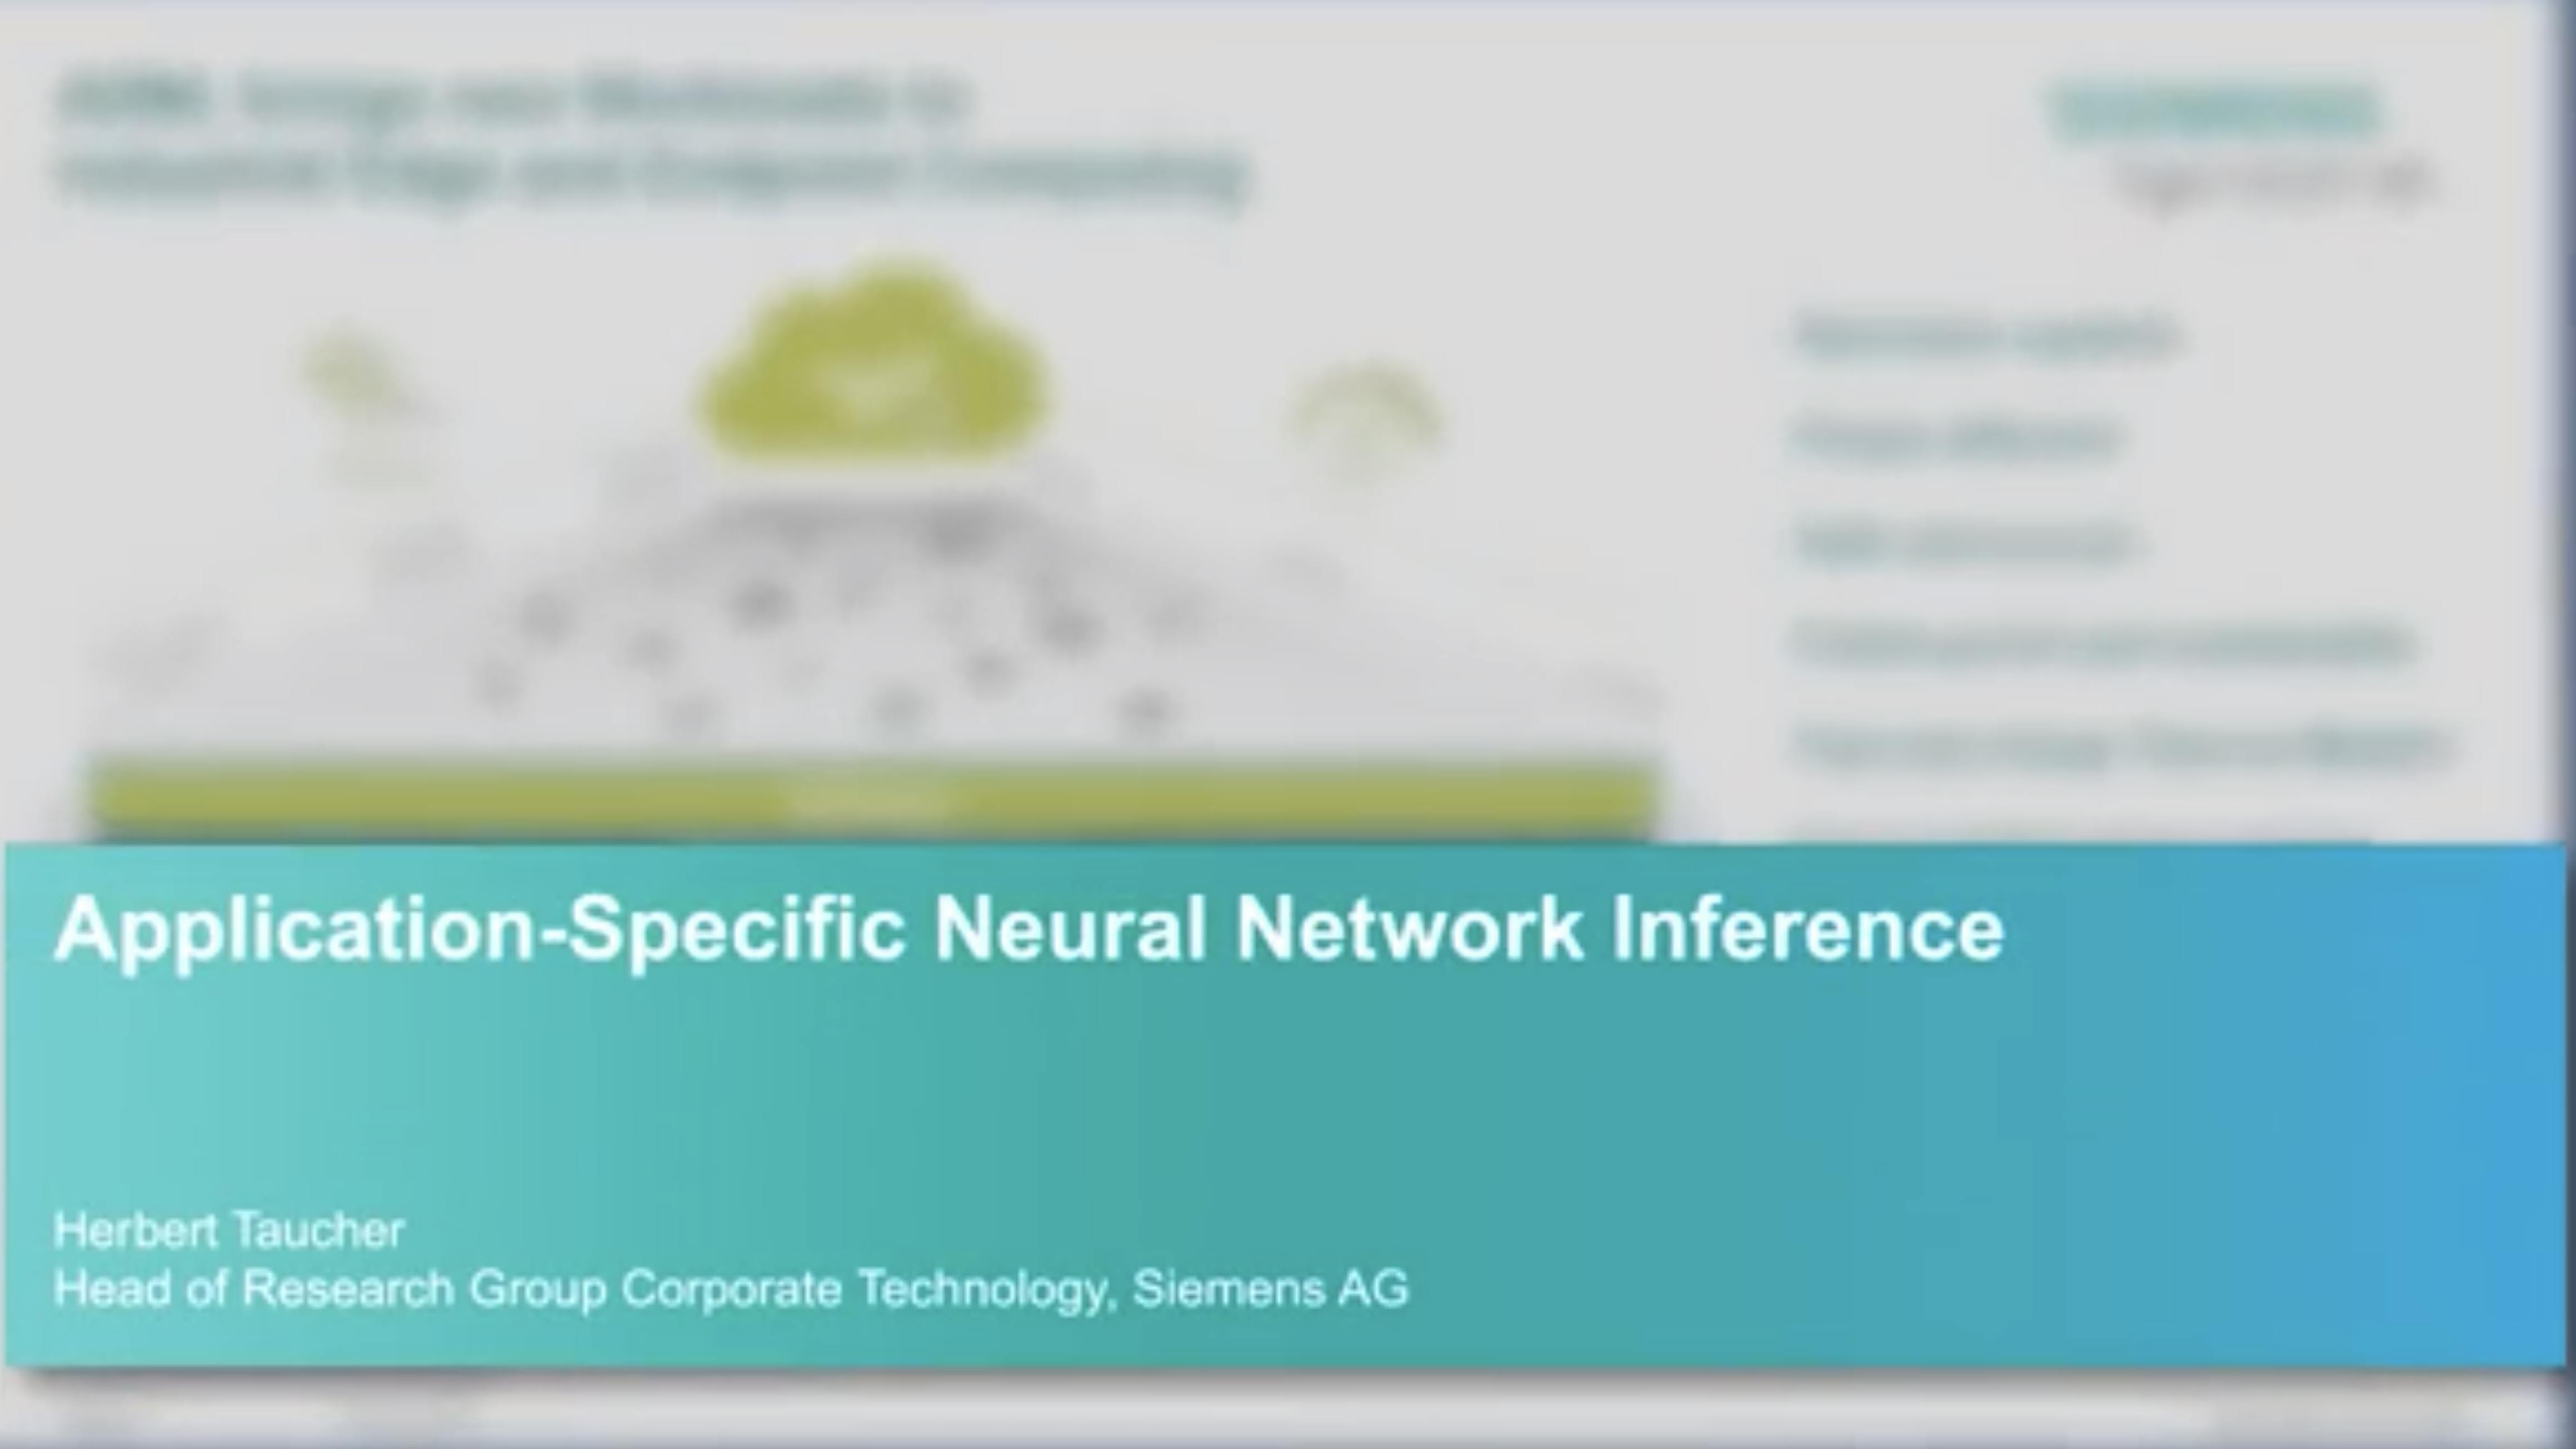 Application-Specific Neural Network Inference